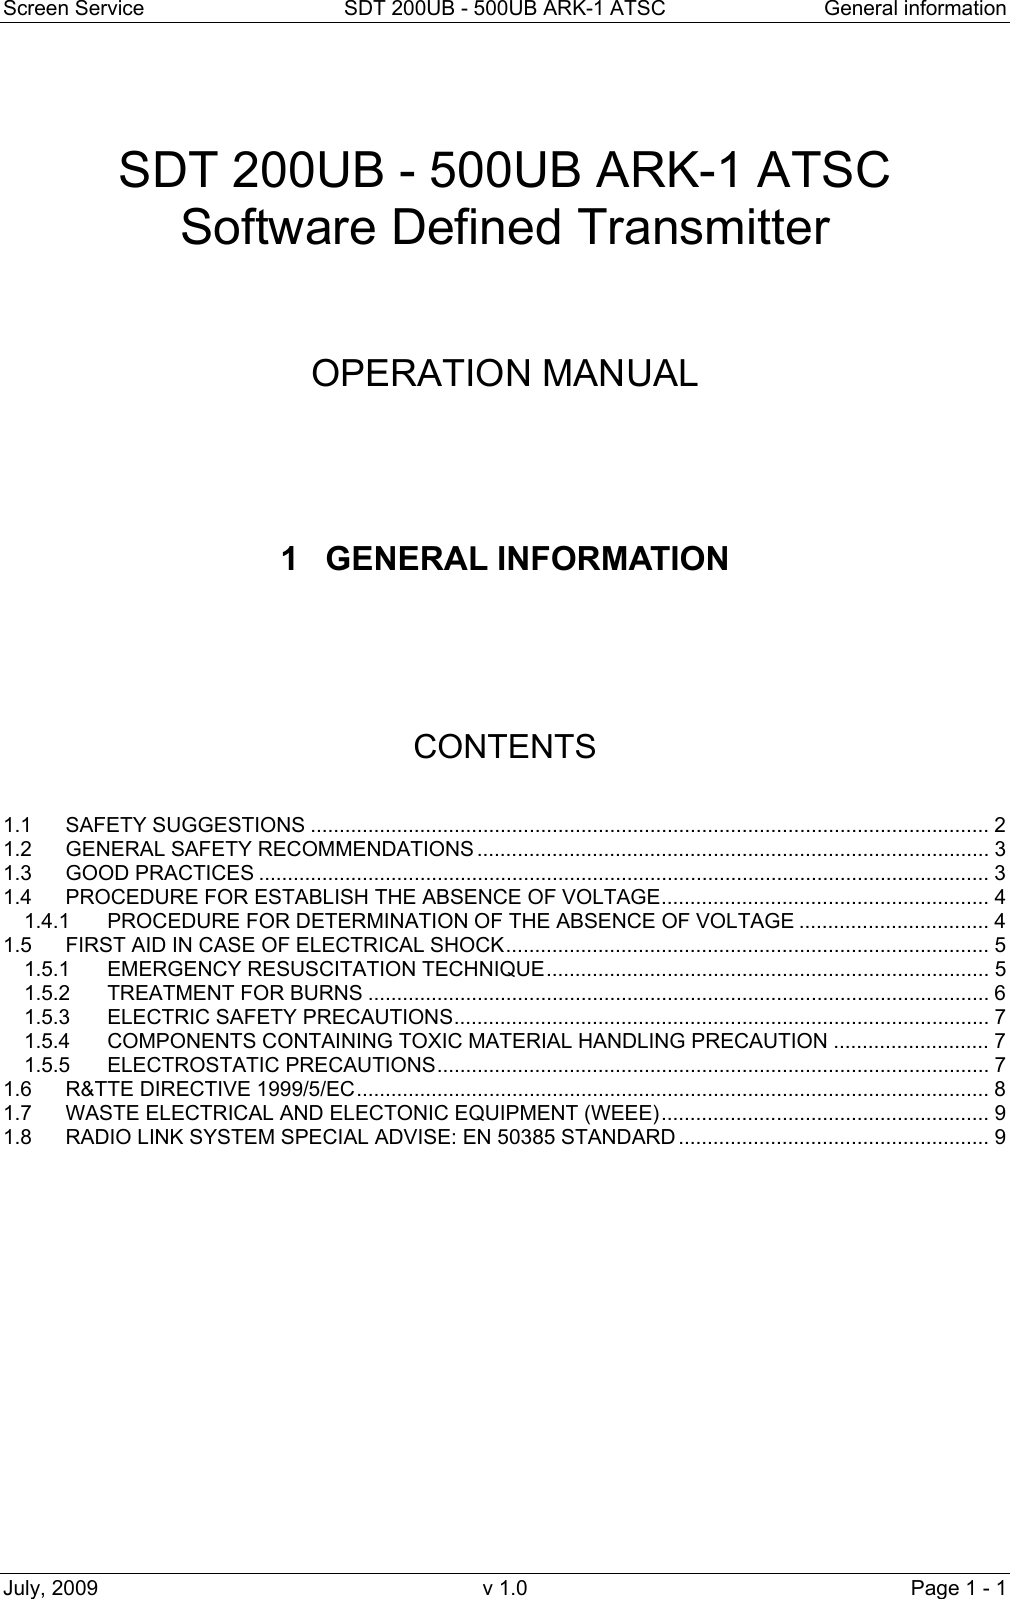 Screen Service  SDT 200UB - 500UB ARK-1 ATSC  General information July, 2009  v 1.0  Page 1 - 1    SDT 200UB - 500UB ARK-1 ATSC Software Defined Transmitter     OPERATION MANUAL      1 GENERAL INFORMATION       CONTENTS   1.1 SAFETY SUGGESTIONS ...................................................................................................................... 2 1.2 GENERAL SAFETY RECOMMENDATIONS ......................................................................................... 3 1.3 GOOD PRACTICES ............................................................................................................................... 3 1.4 PROCEDURE FOR ESTABLISH THE ABSENCE OF VOLTAGE......................................................... 4 1.4.1 PROCEDURE FOR DETERMINATION OF THE ABSENCE OF VOLTAGE ................................. 4 1.5 FIRST AID IN CASE OF ELECTRICAL SHOCK.................................................................................... 5 1.5.1 EMERGENCY RESUSCITATION TECHNIQUE............................................................................. 5 1.5.2 TREATMENT FOR BURNS ............................................................................................................ 6 1.5.3 ELECTRIC SAFETY PRECAUTIONS............................................................................................. 7 1.5.4 COMPONENTS CONTAINING TOXIC MATERIAL HANDLING PRECAUTION ........................... 7 1.5.5 ELECTROSTATIC PRECAUTIONS................................................................................................ 7 1.6 R&amp;TTE DIRECTIVE 1999/5/EC.............................................................................................................. 8 1.7 WASTE ELECTRICAL AND ELECTONIC EQUIPMENT (WEEE)......................................................... 9 1.8 RADIO LINK SYSTEM SPECIAL ADVISE: EN 50385 STANDARD...................................................... 9                 